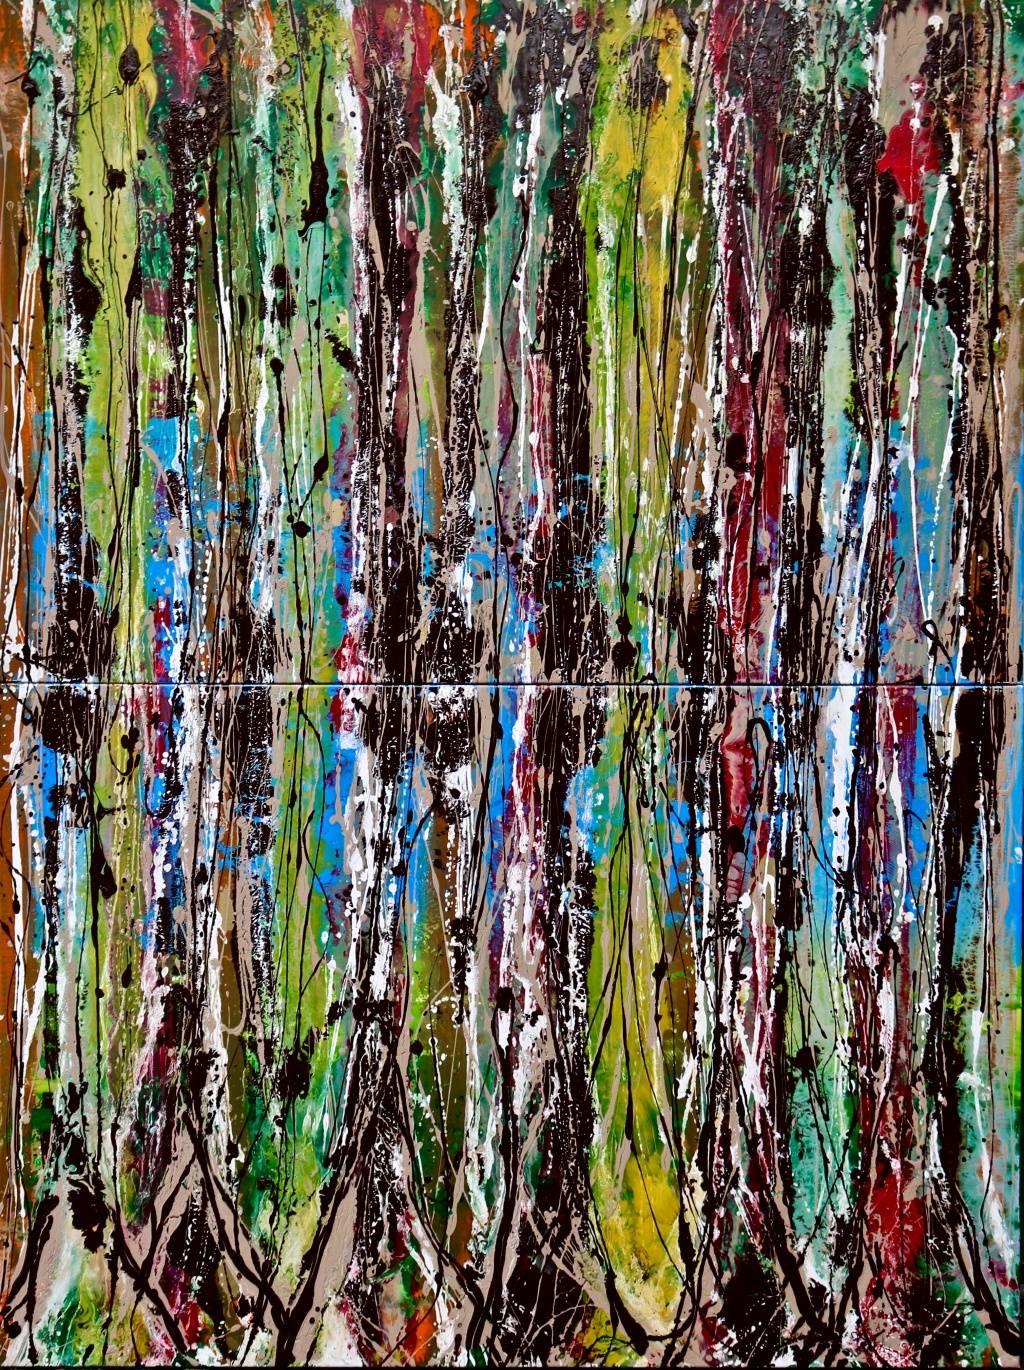 Translated title: "Vertical forest".

Mixed media on canvas. 
This is a diptych and each canvas measures: 100 x 150 cm.
